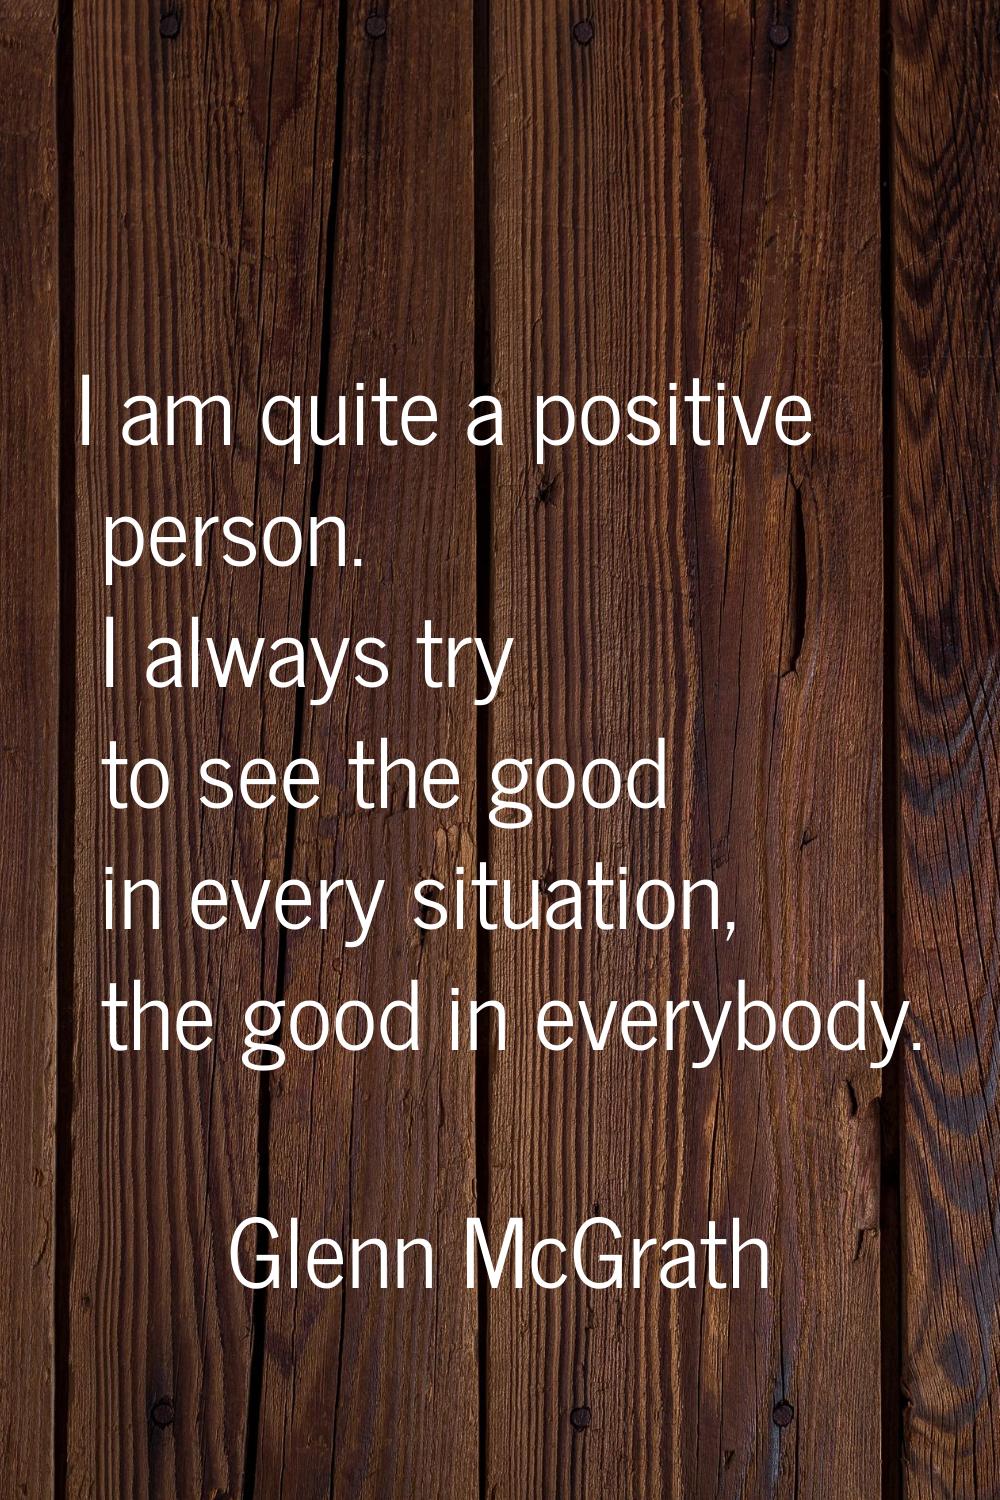 I am quite a positive person. I always try to see the good in every situation, the good in everybod